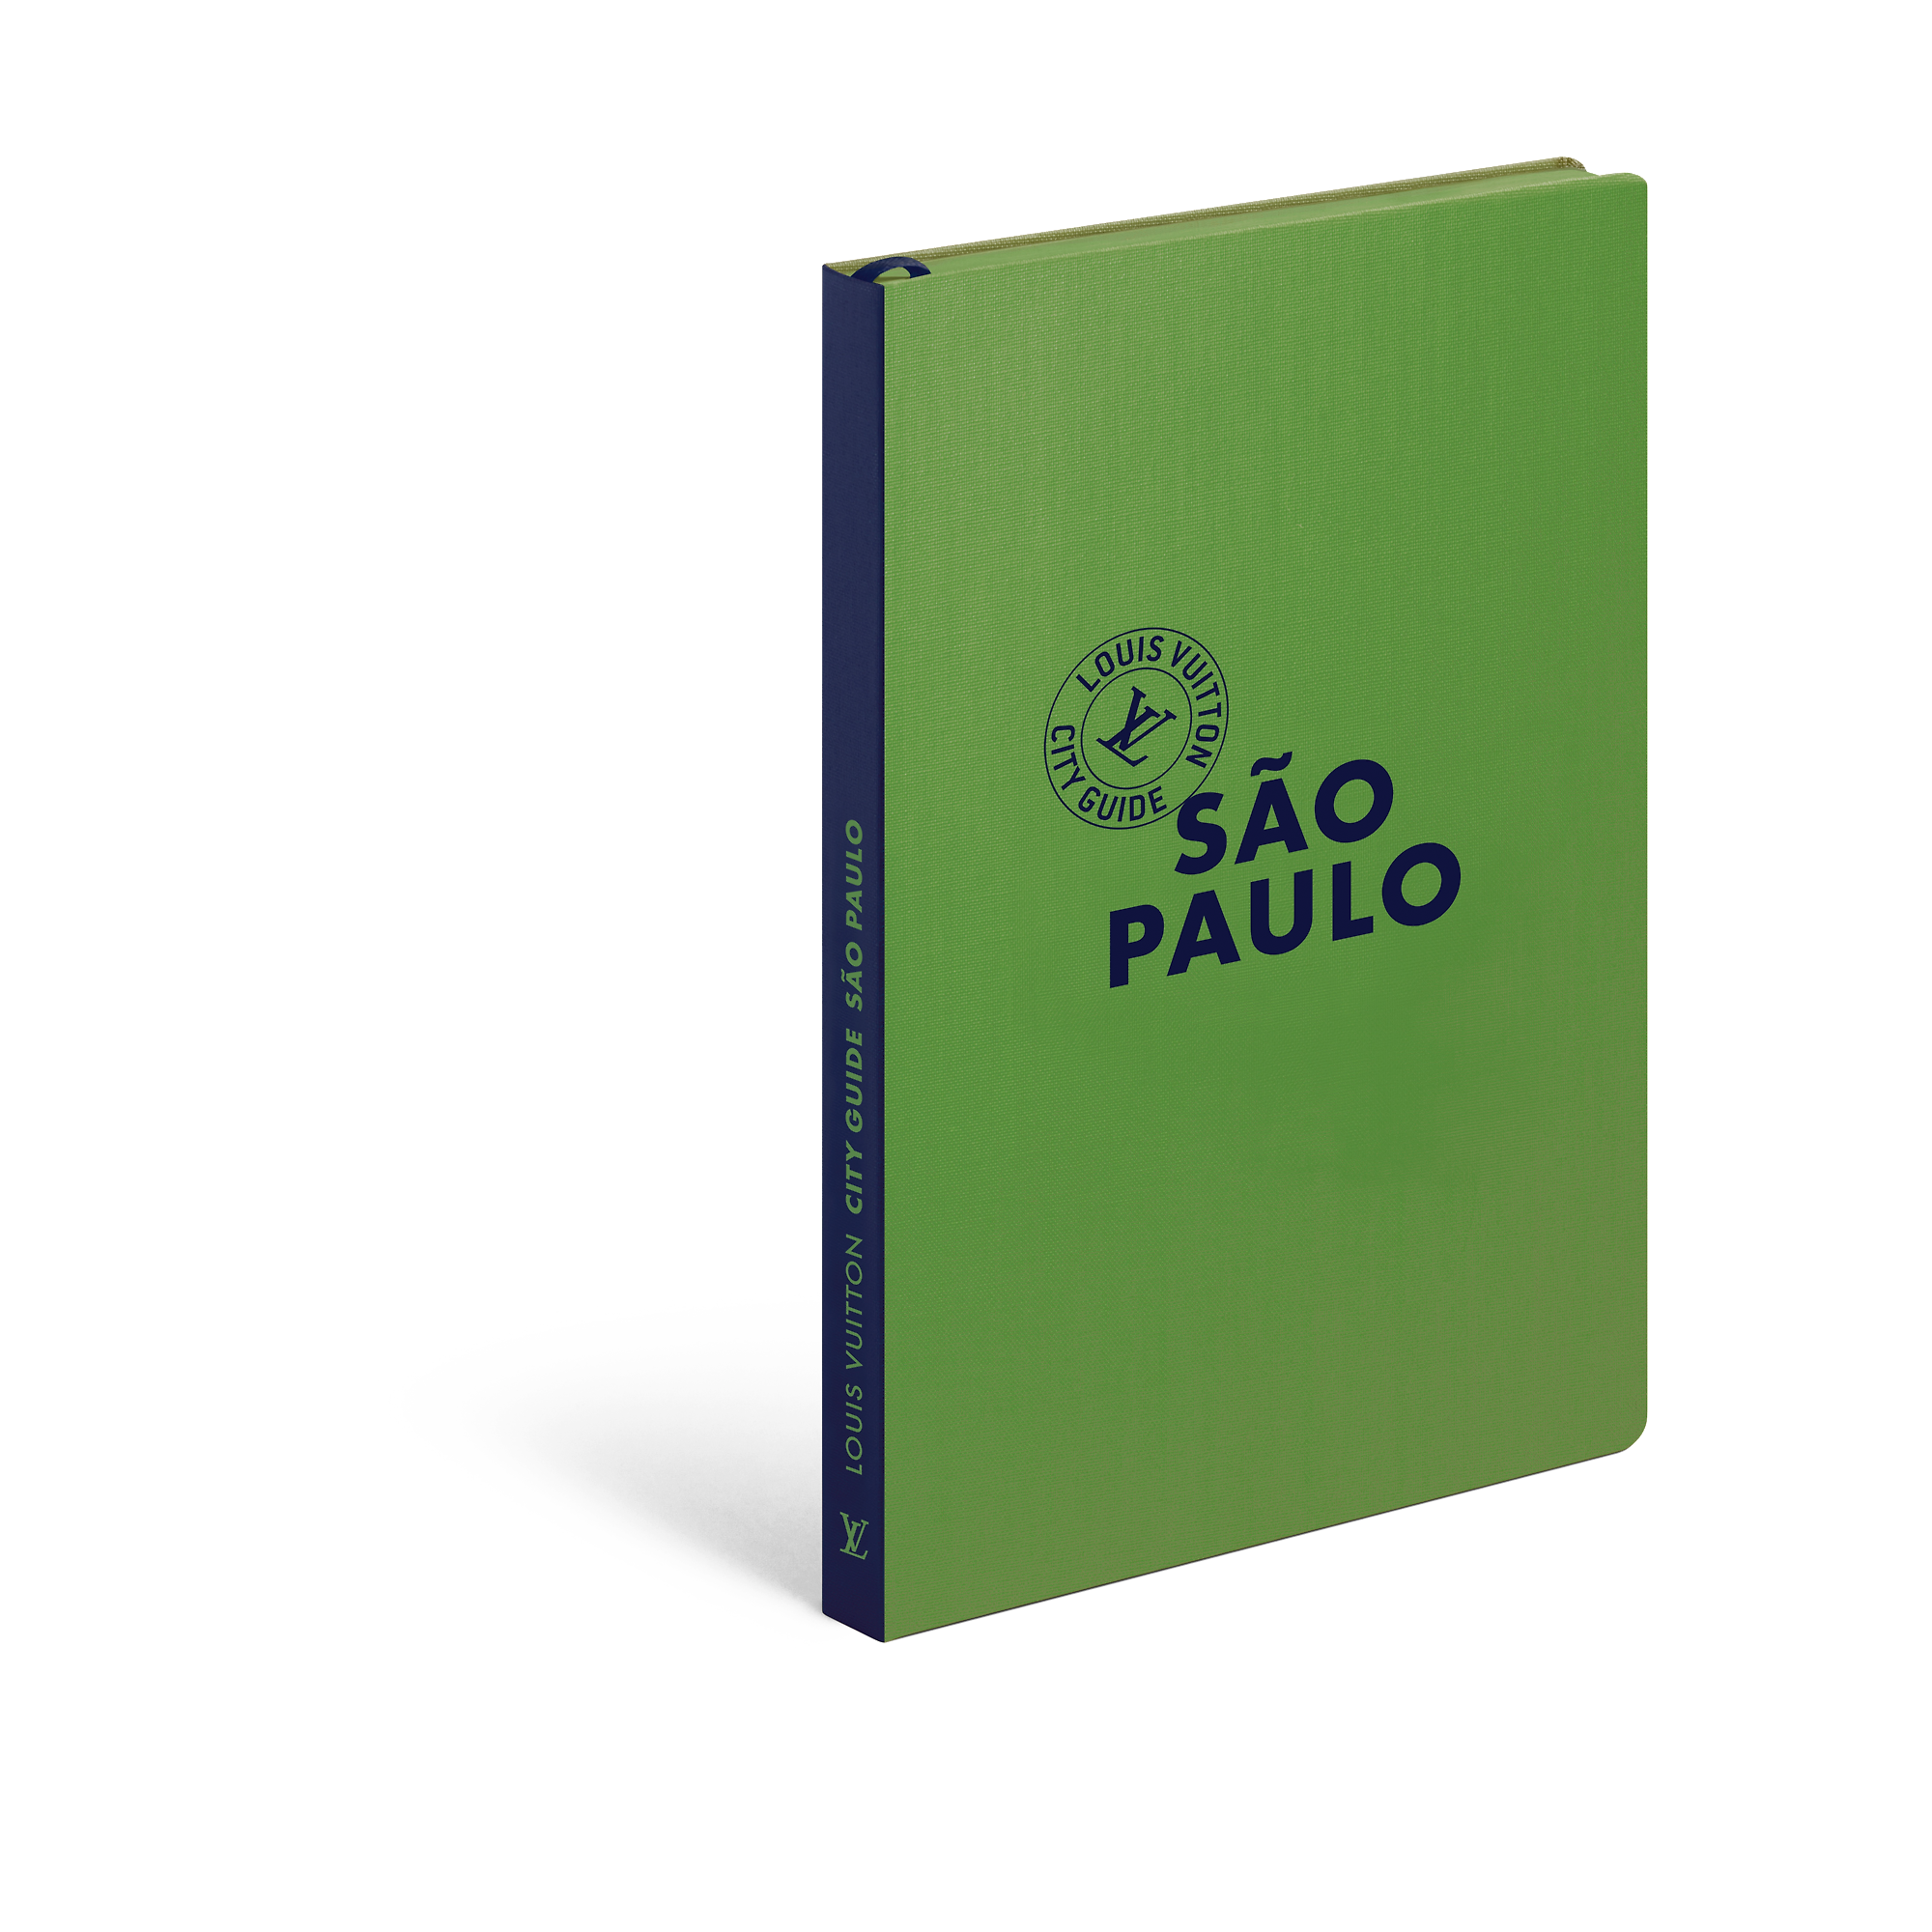 Louis Vuitton City Guide Sao Paulo, French Version – Art of Living – Books and Stationery R08986